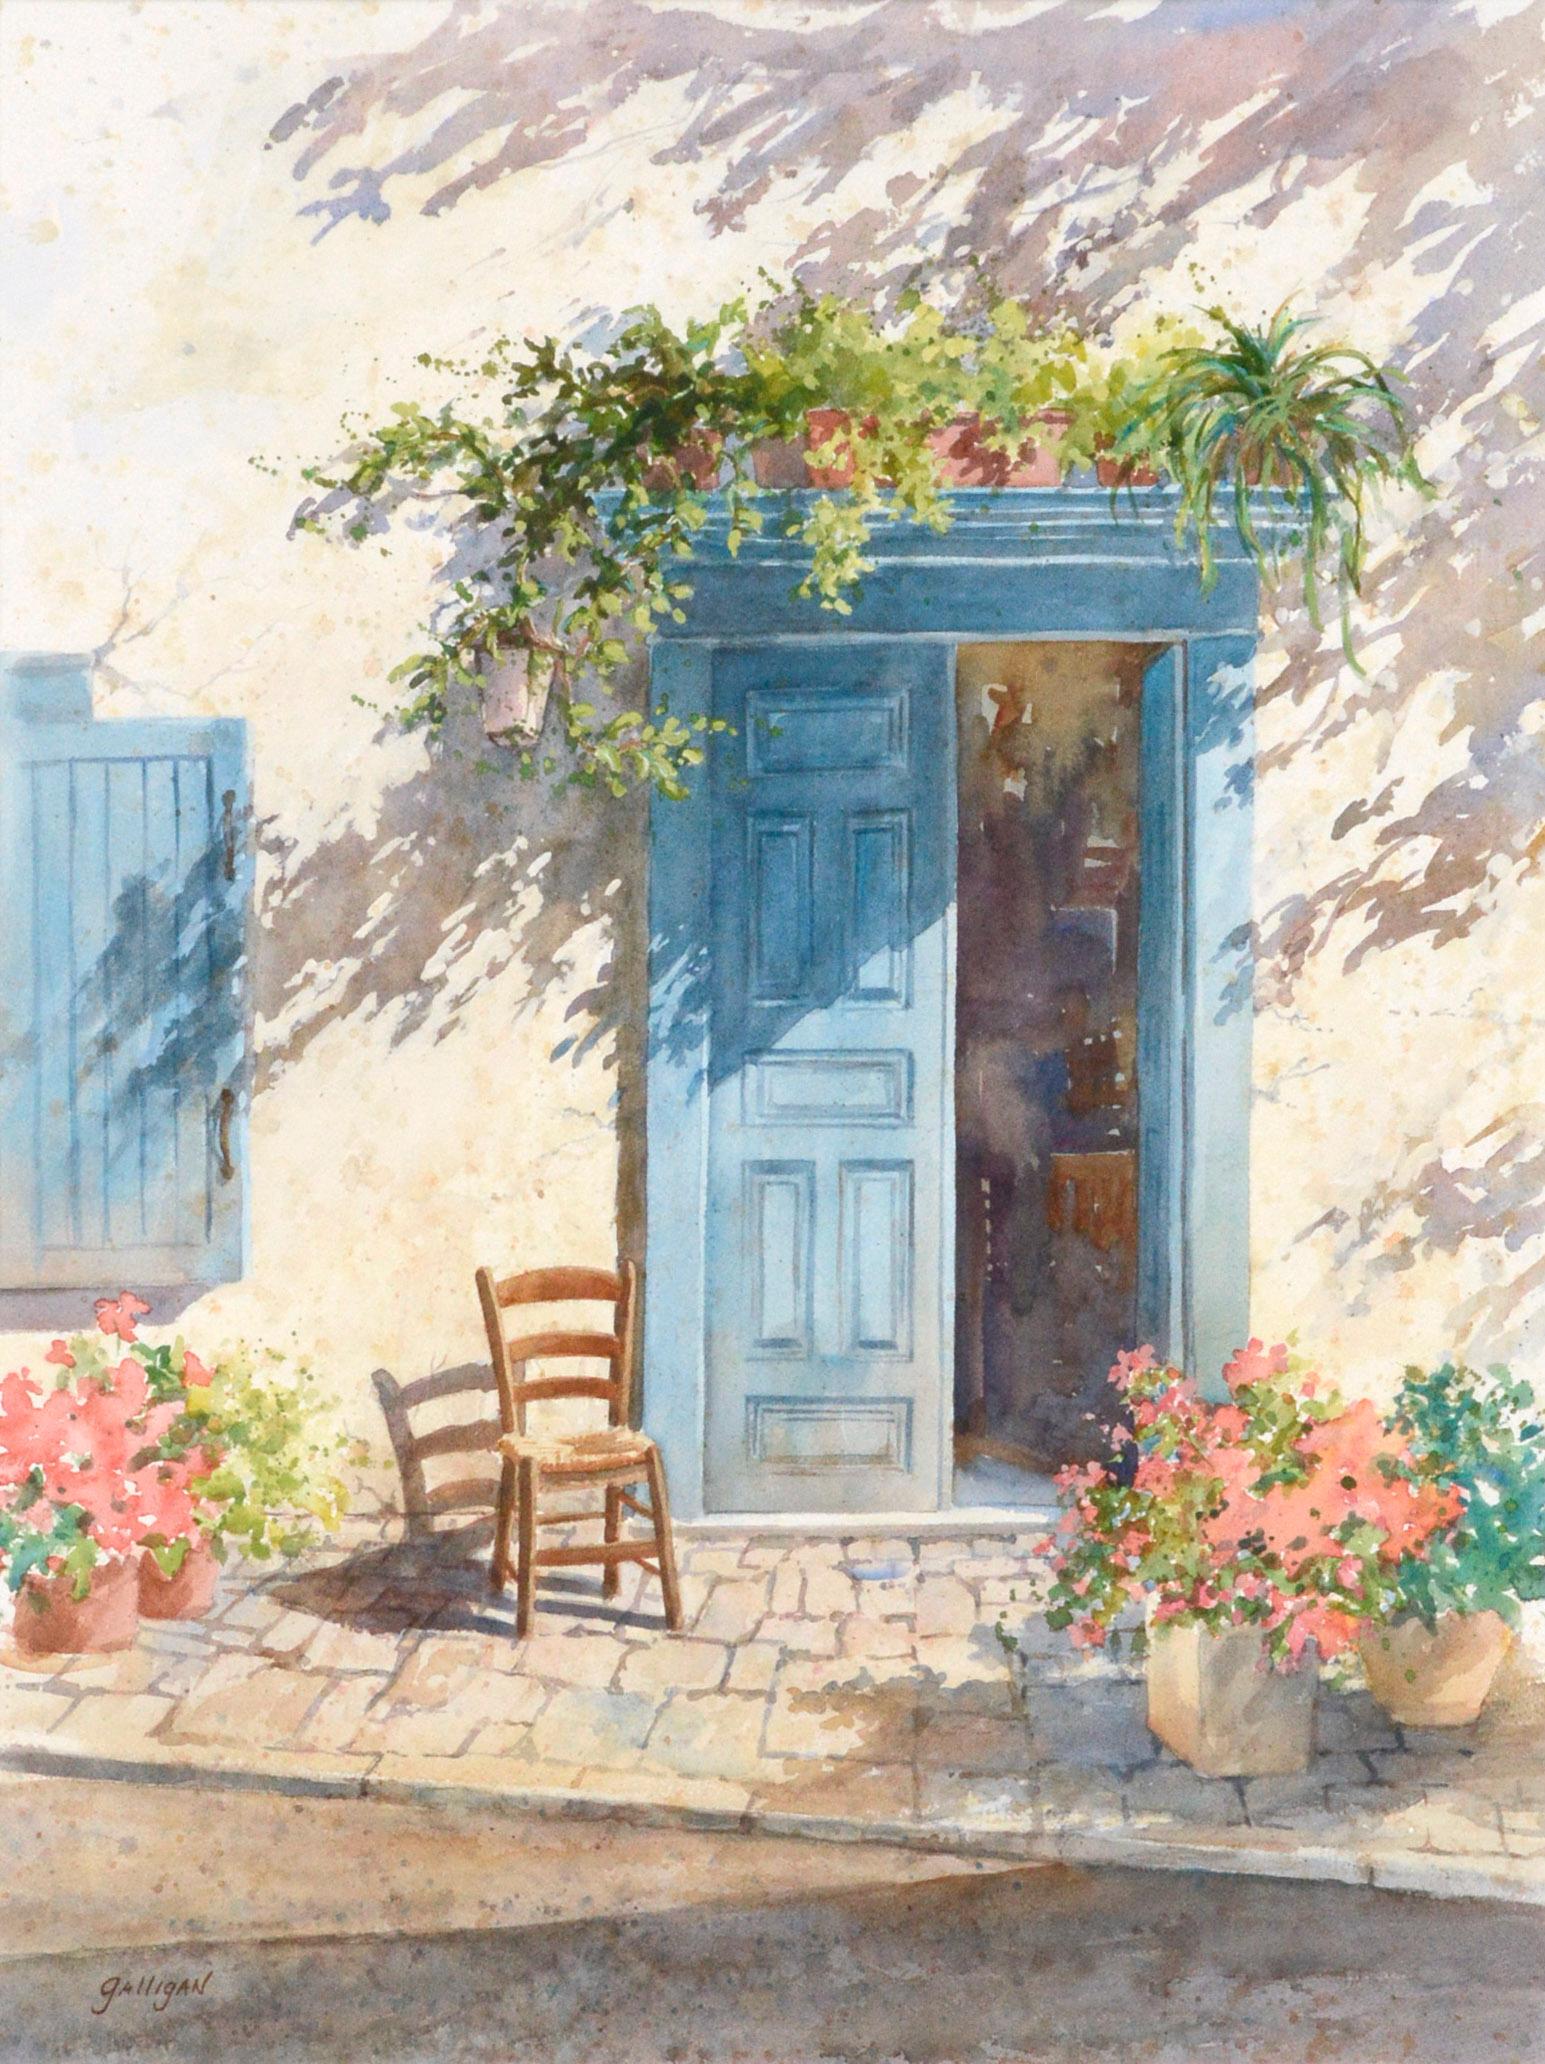 Blue Doorway with Chair and Flowers - Art by Sharon Galligan